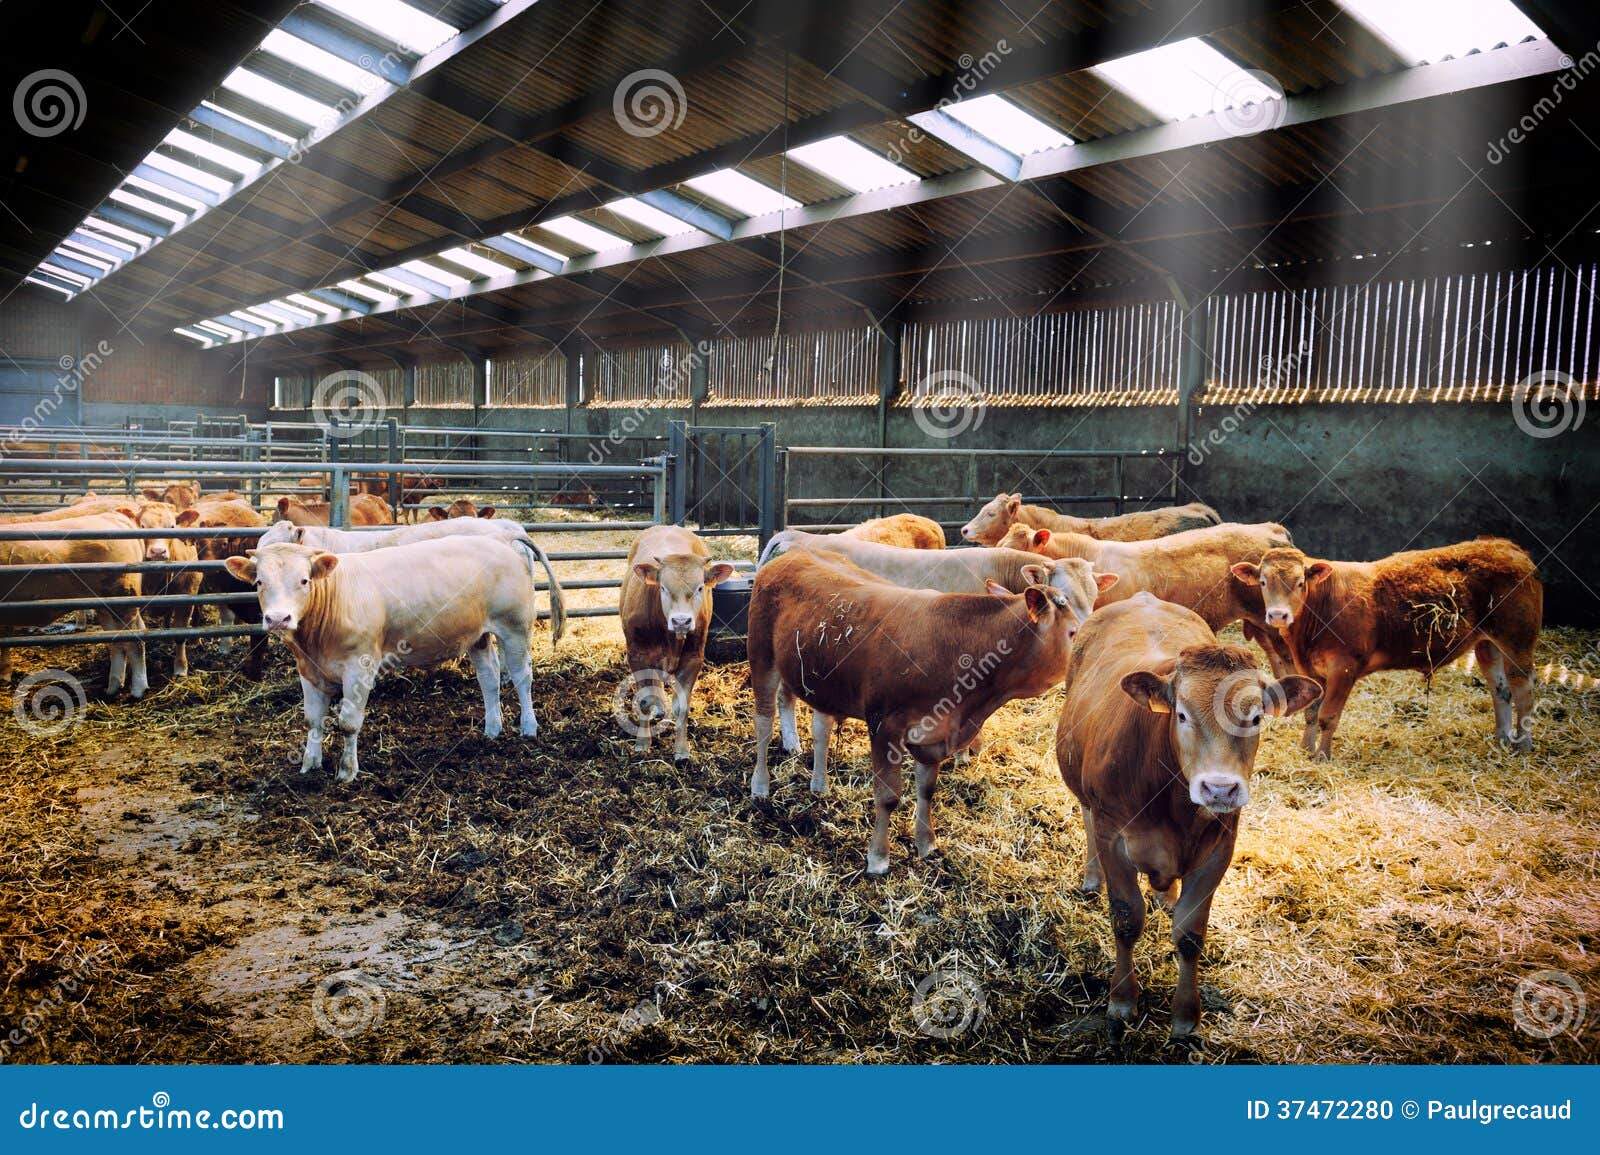 herd of cows in cowshed